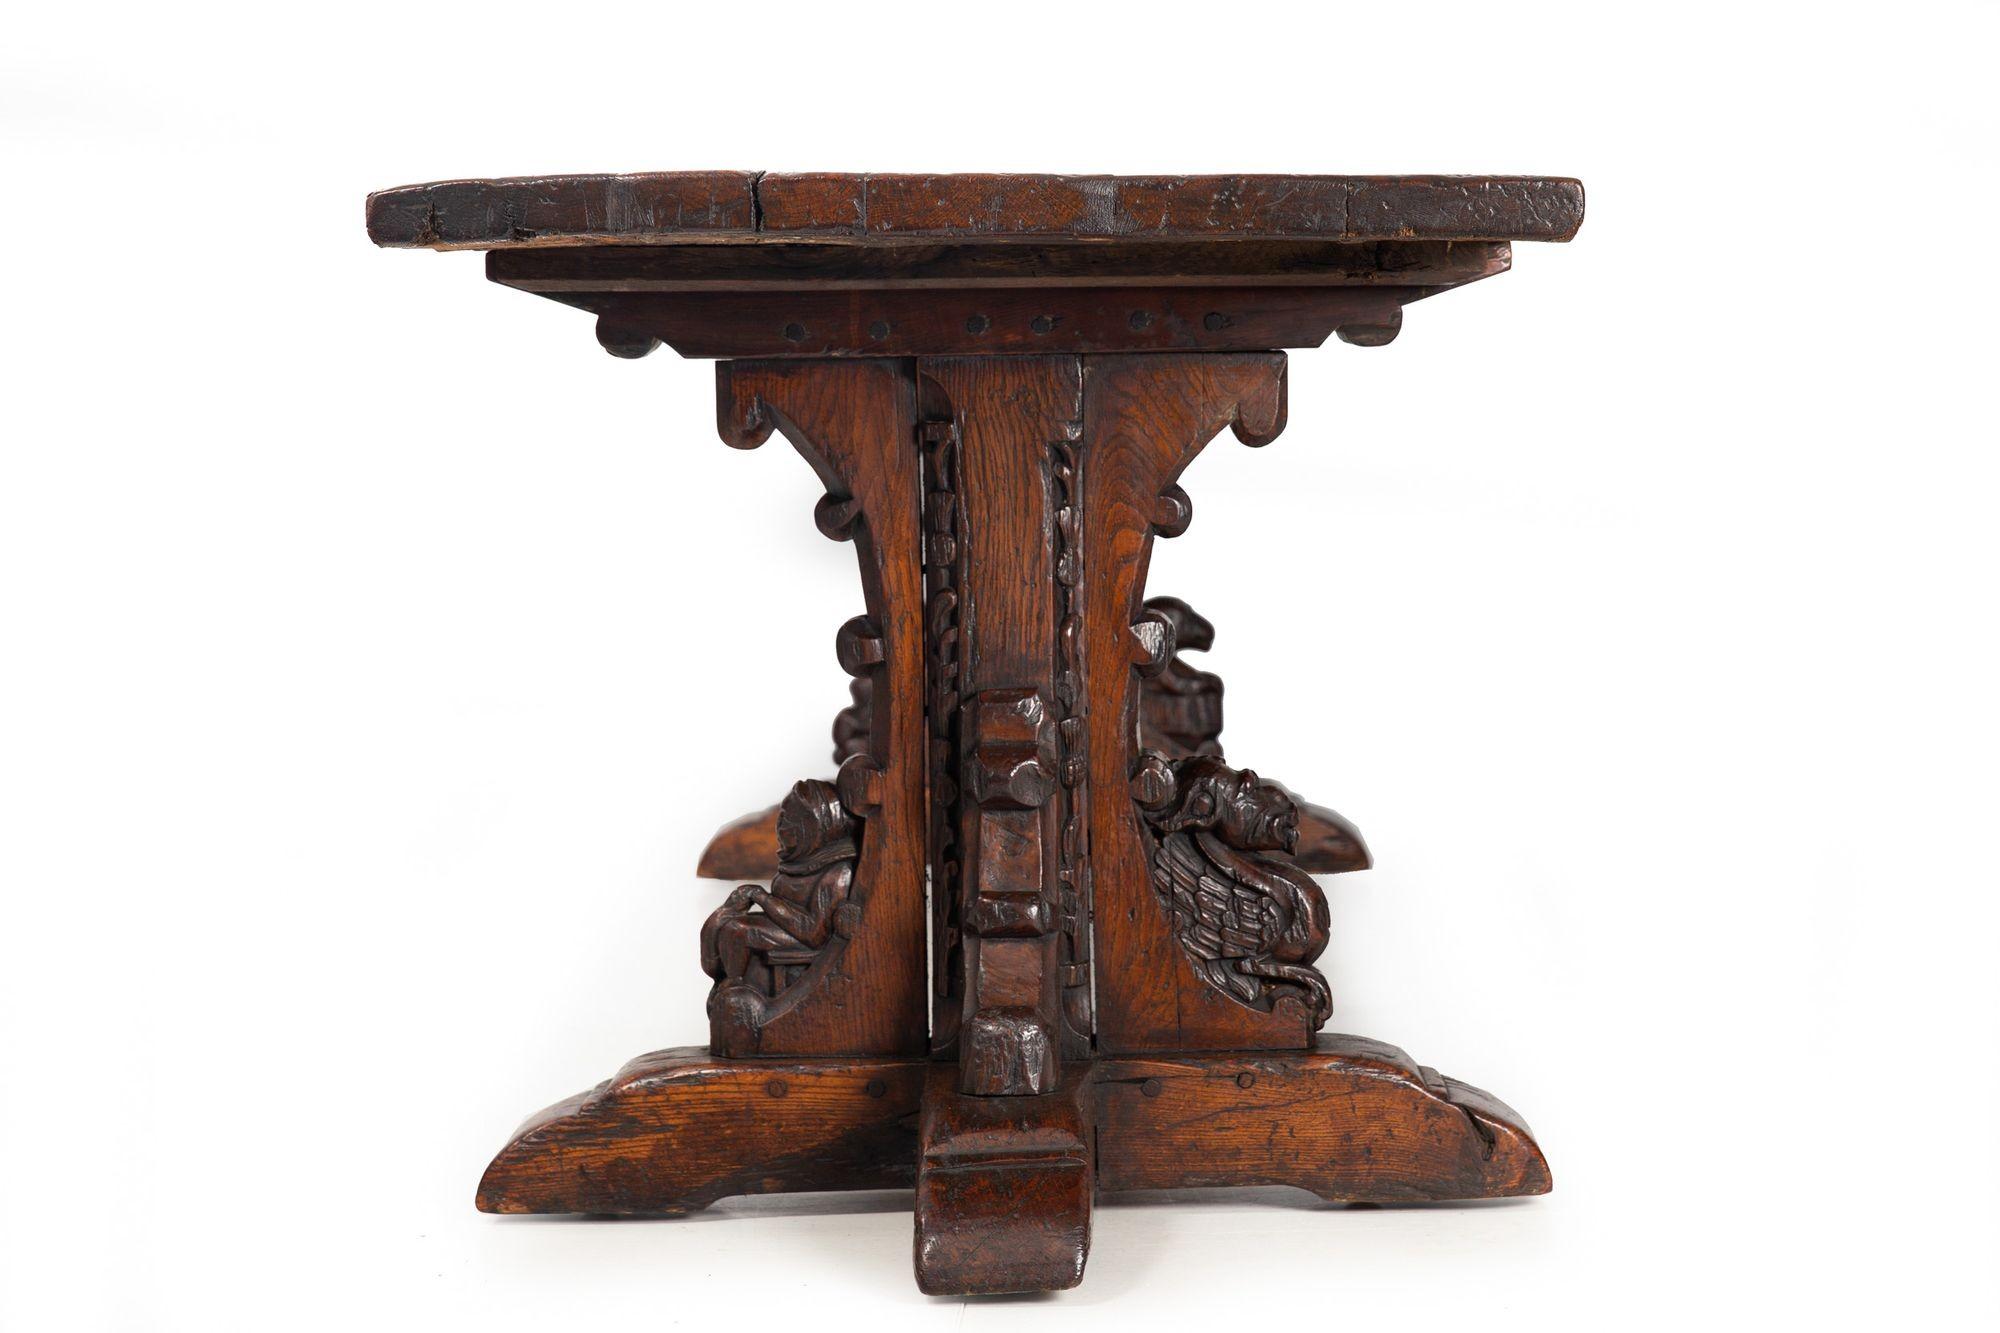 European Huge 9.5’ Gothic Revival Solid Carved Oak Antique Refectory Dining Table